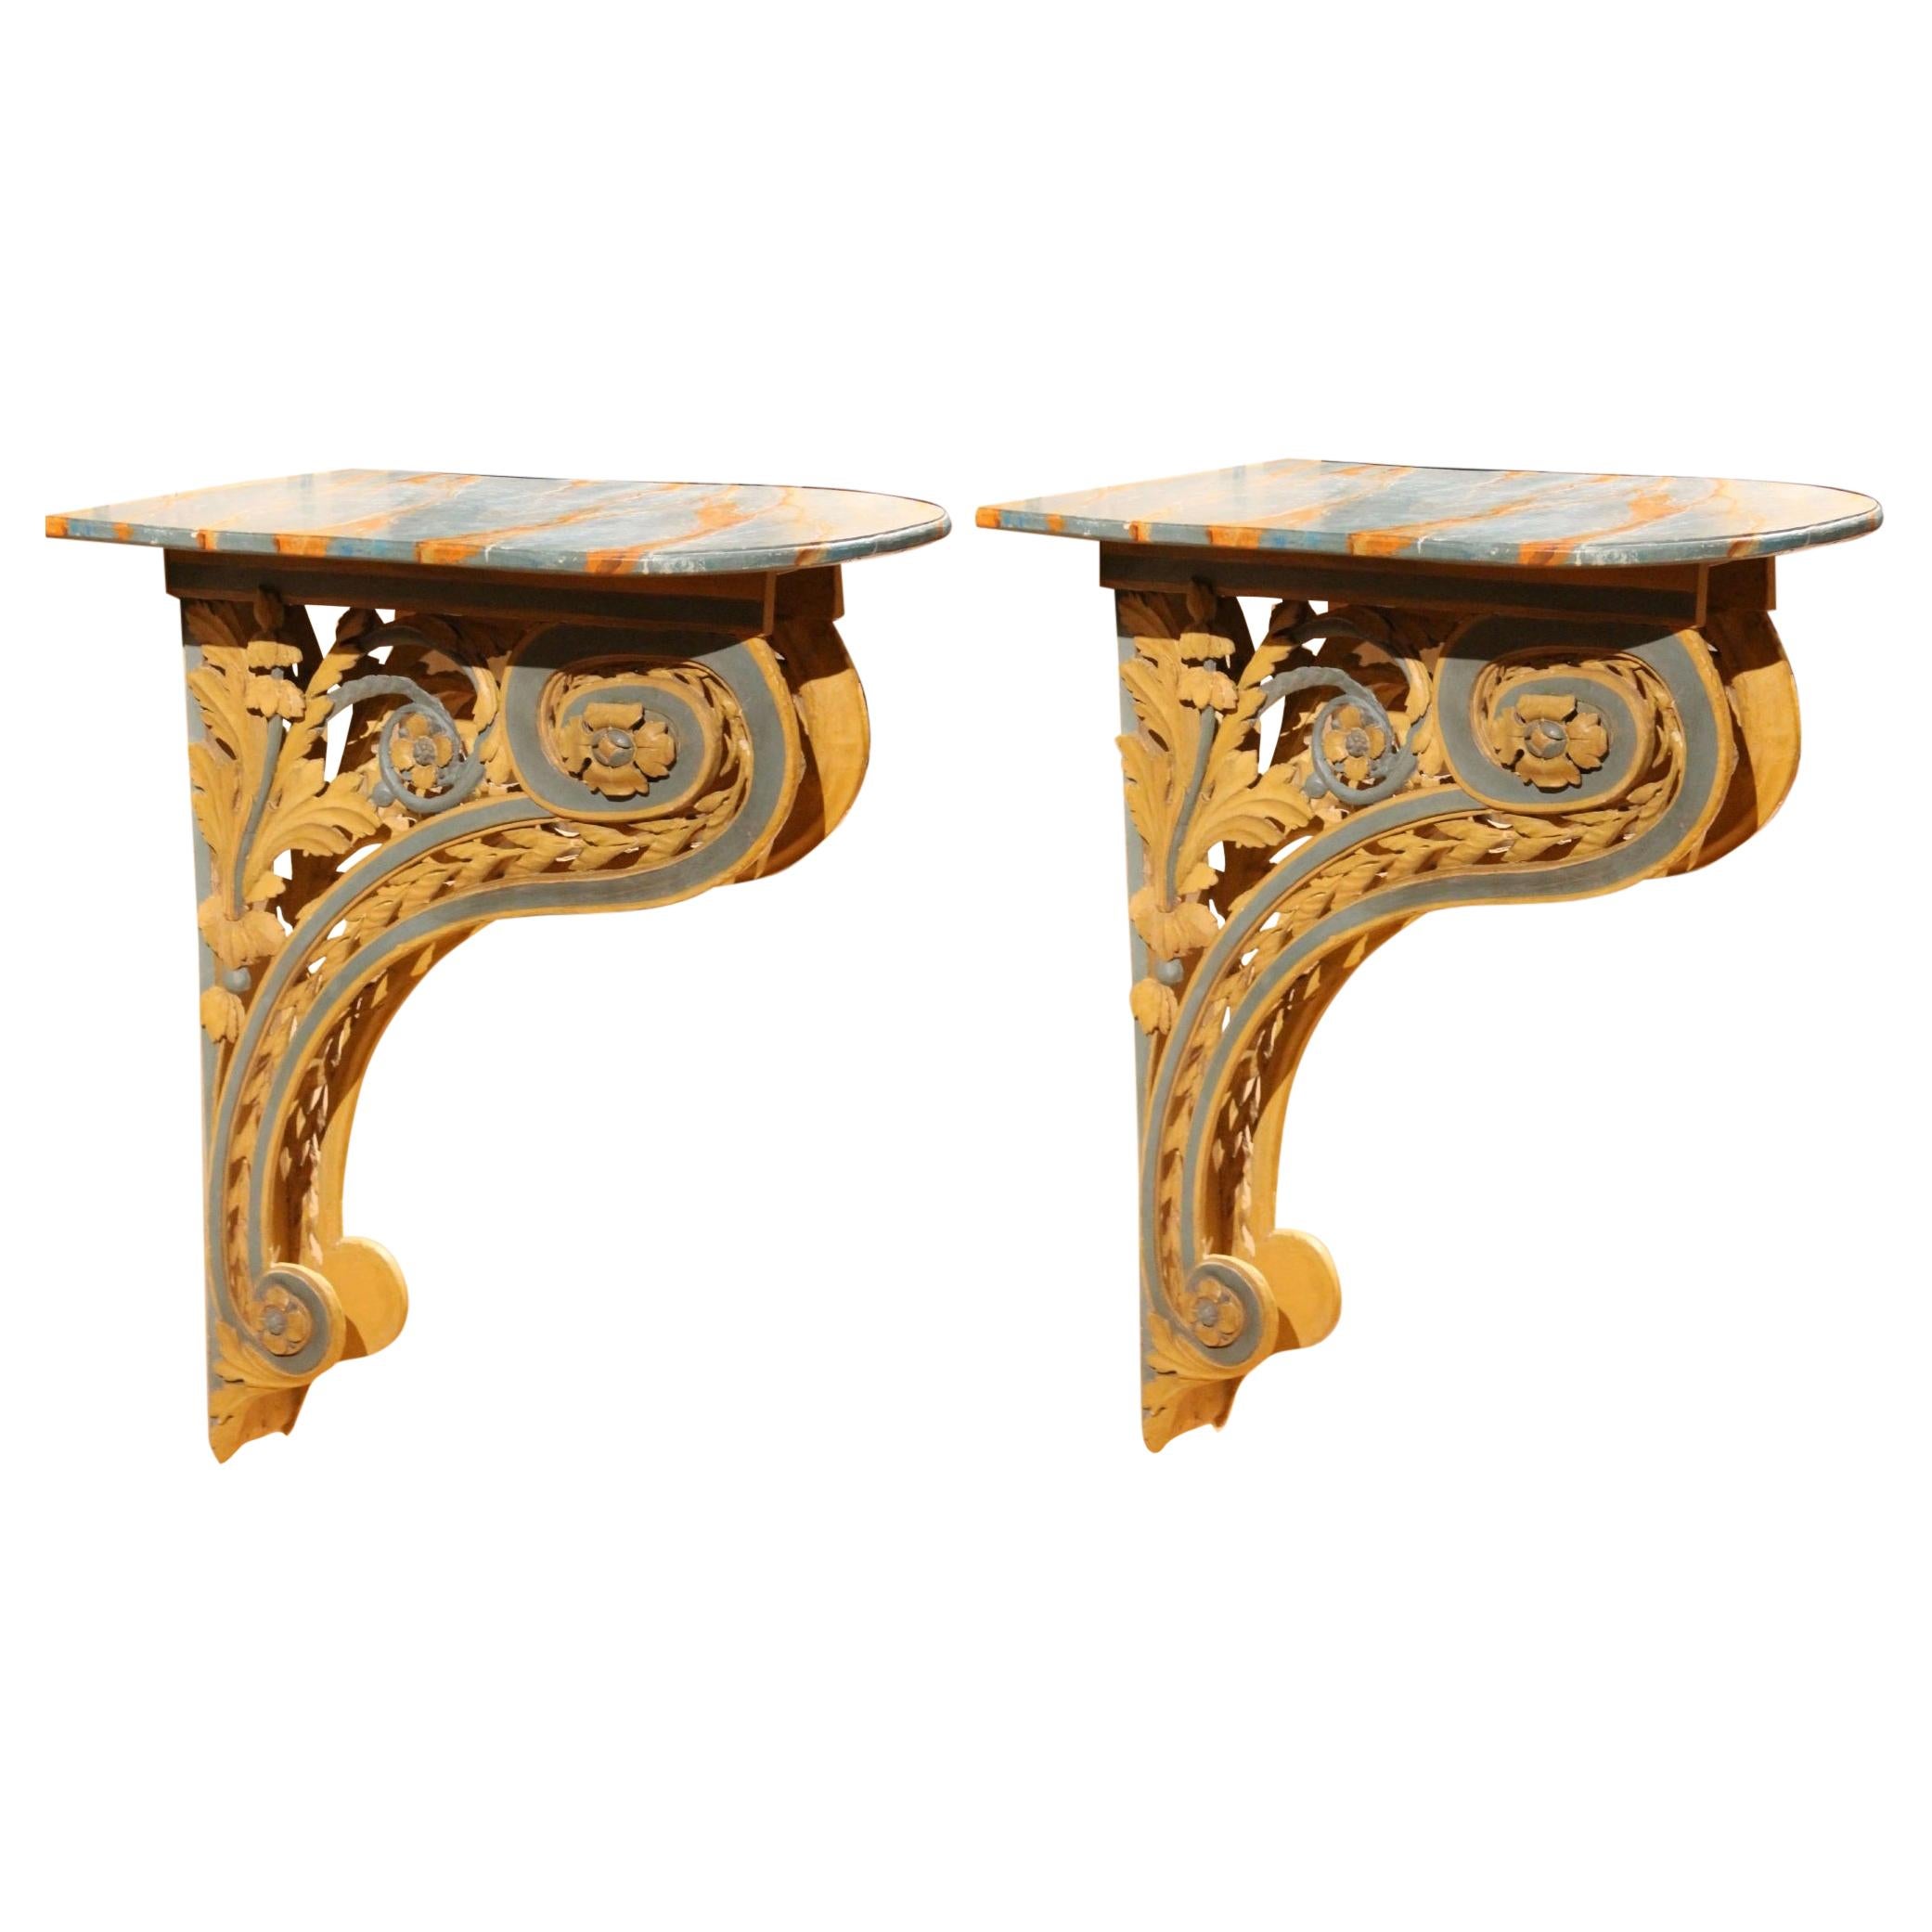 Italian 18th Century Louis XVI Carved and Lacquer Wall Mounted Console Tables